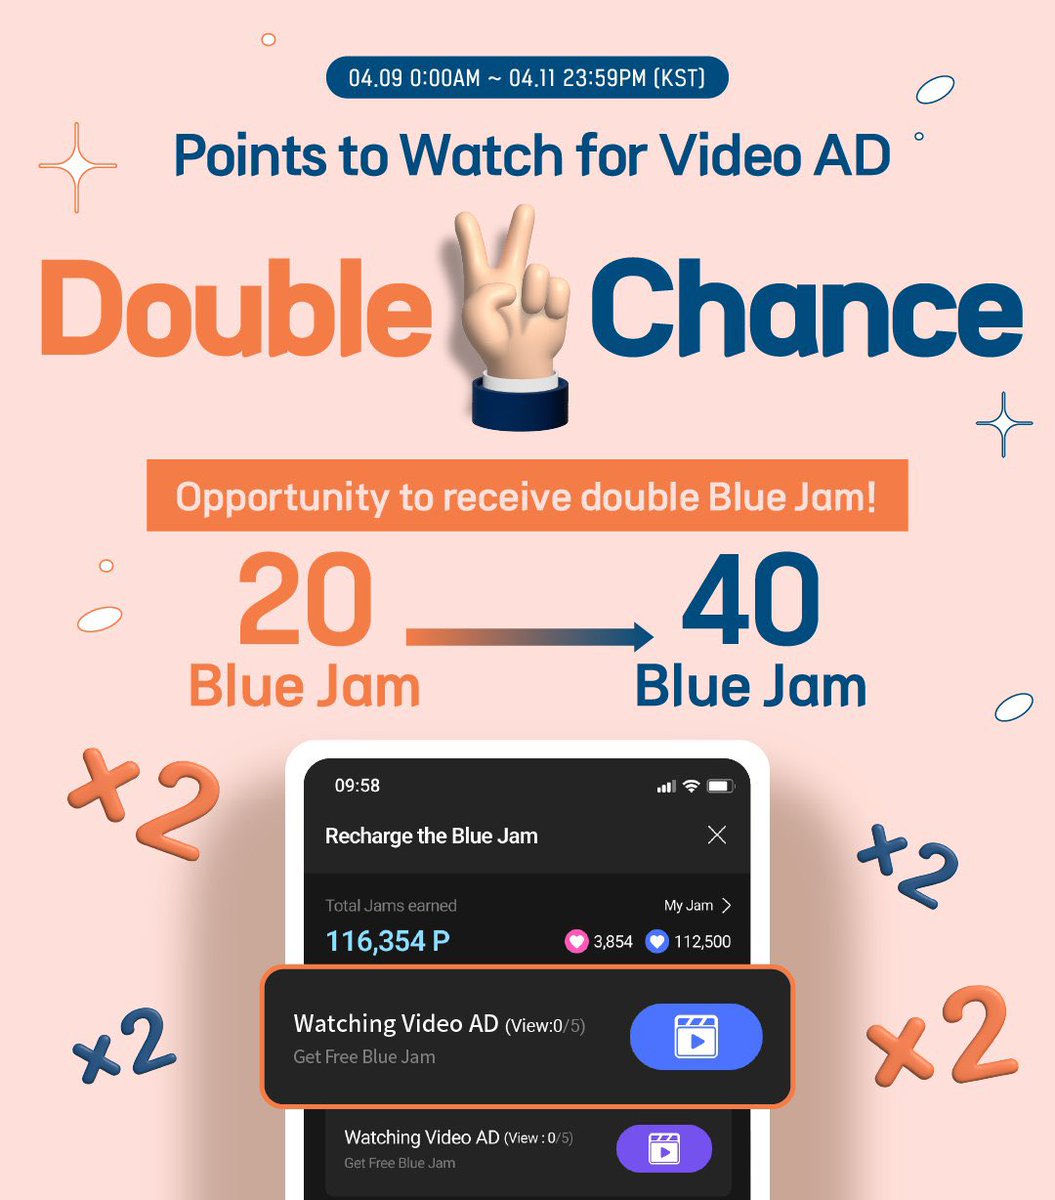 ✌️𝓓𝓸𝓾𝓫𝓵𝓮 𝓒𝓱𝓪𝓷𝓬𝓮✌️ Watching video ad 𝟐𝟎 ⤍ 𝟒𝟎 Double Blue Jam Let's watch the video ad and get double Blue Jam 🗓️4/9 00AM ~ 4/11 23:59:59 KST Grab the chance to add your votes📢📢